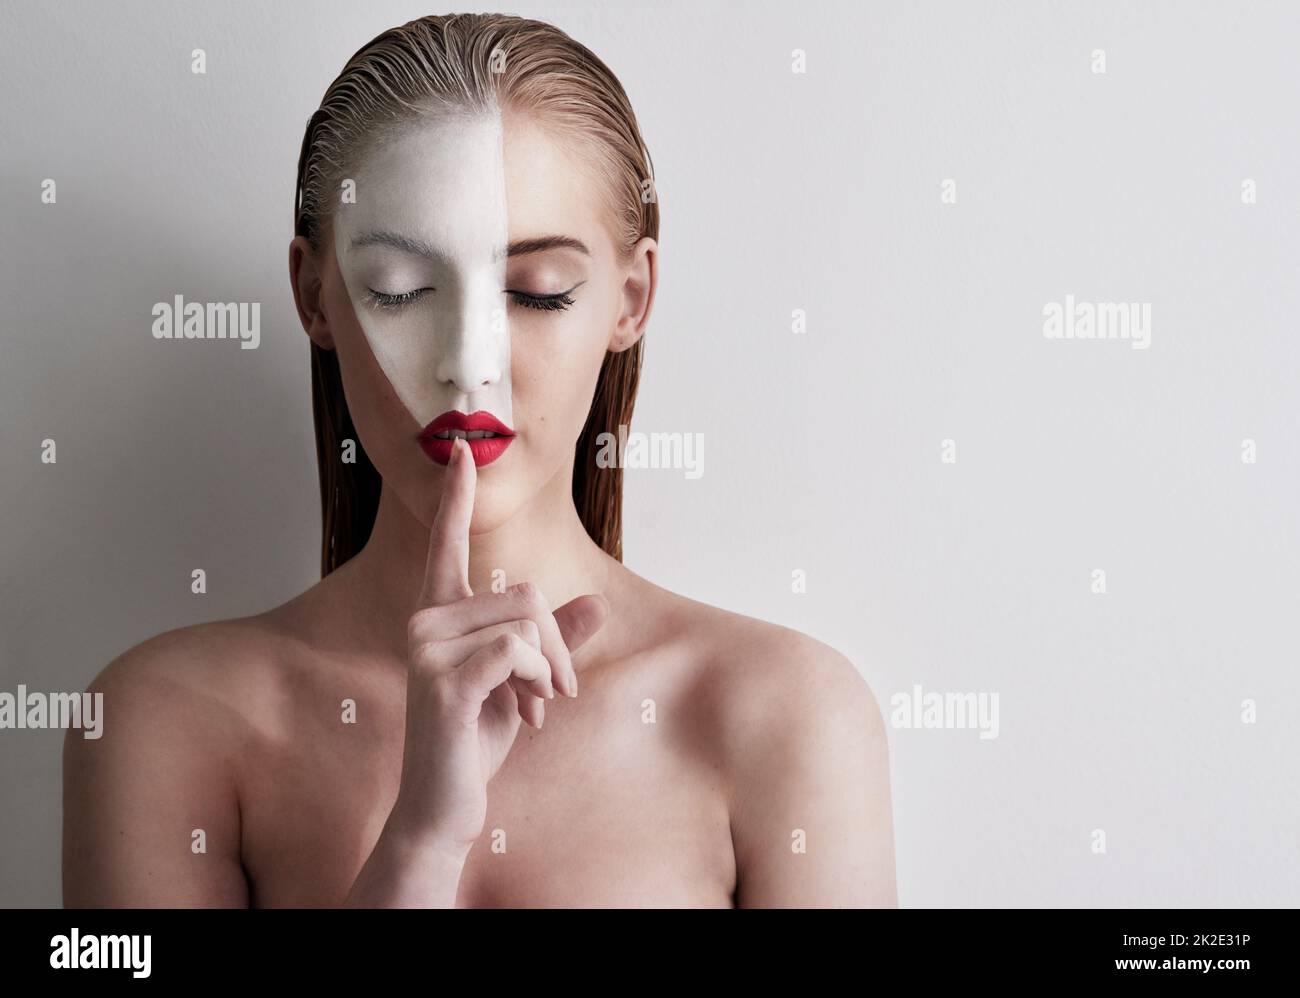 Beauty is art. Shot of a beautiful woman wearing face paint and red lipstick against a plain background. Stock Photo